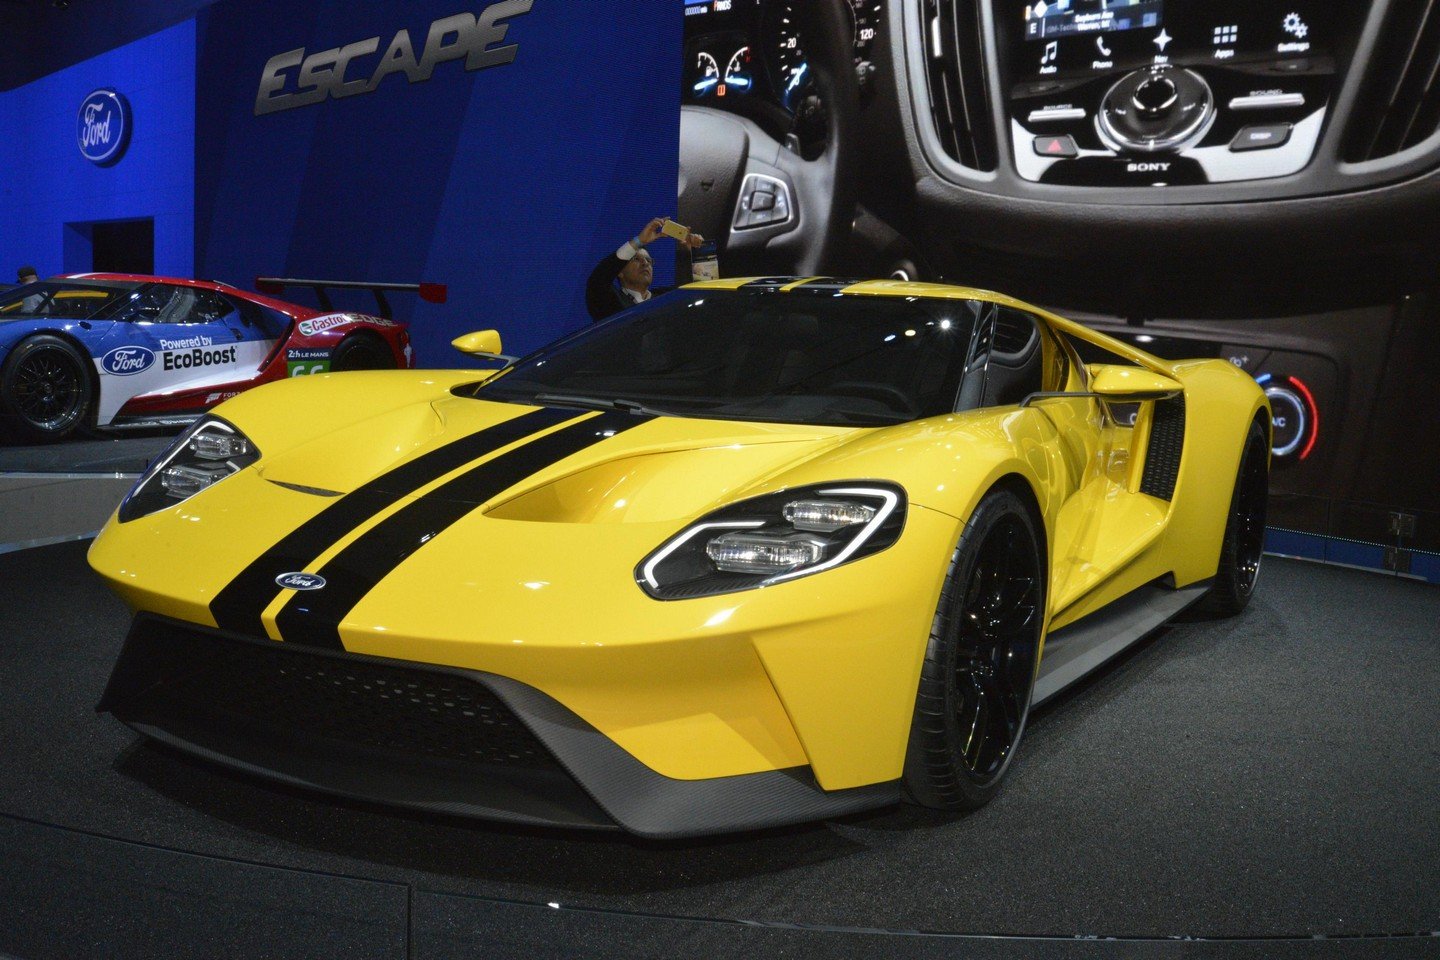 2016, Ford gt, Concept, Cars, Coupe, Yellow, Livery Wallpaper